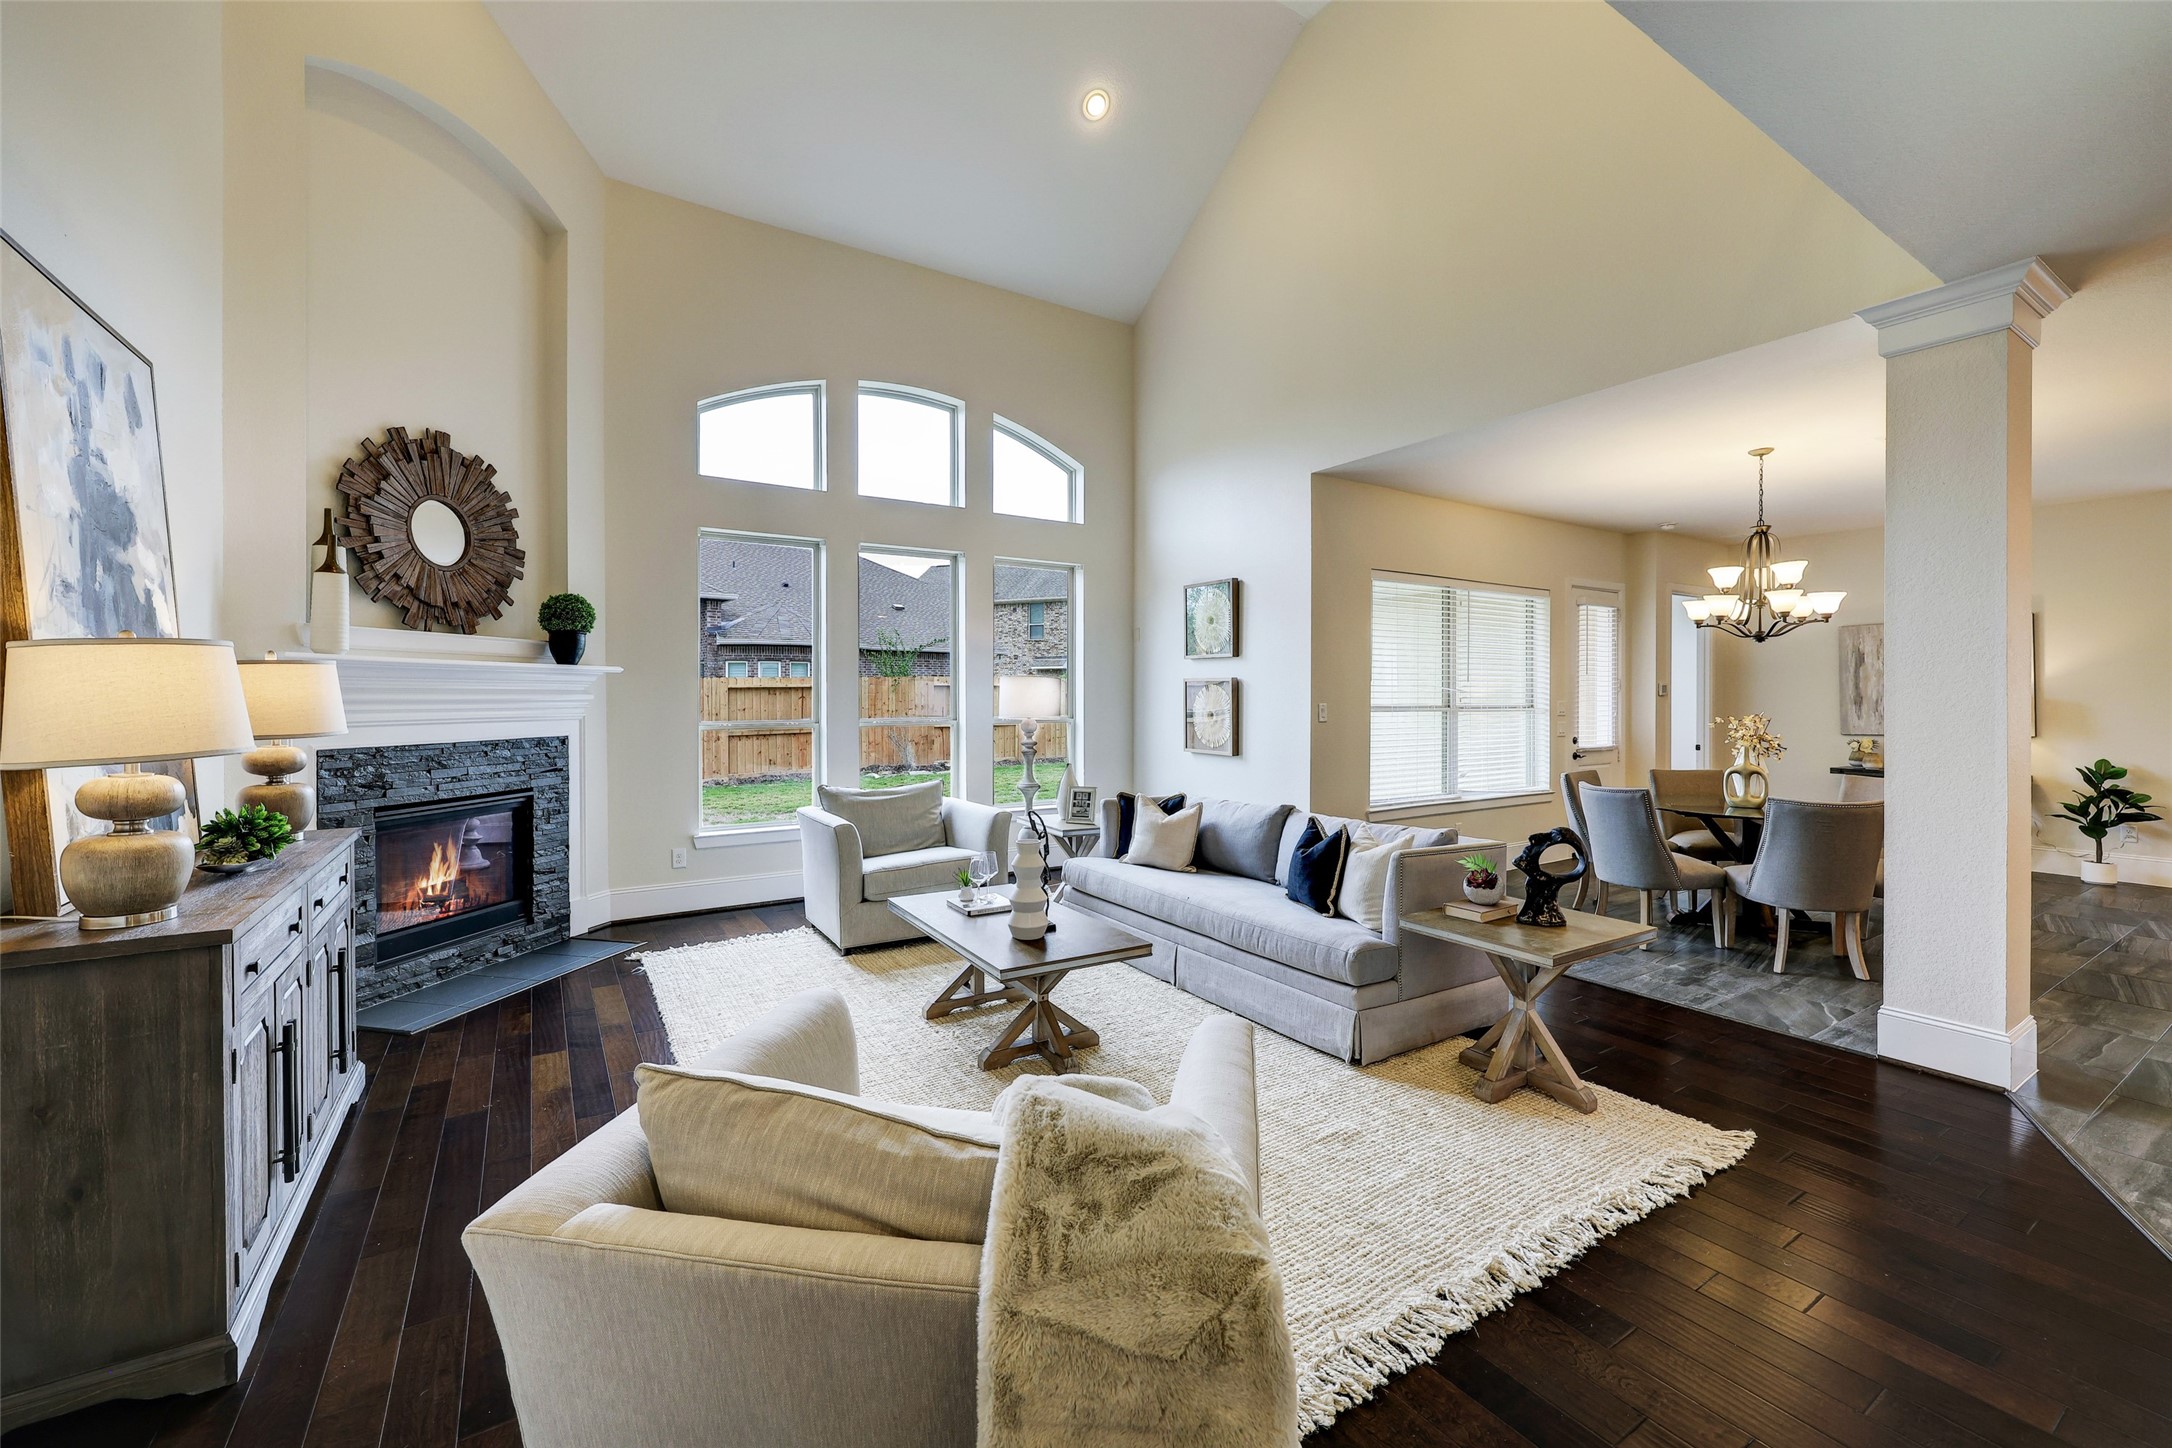 Entertain effortlessly in the soaring 2-story family room, where an open concept design fosters a sense of togetherness and shared experiences.